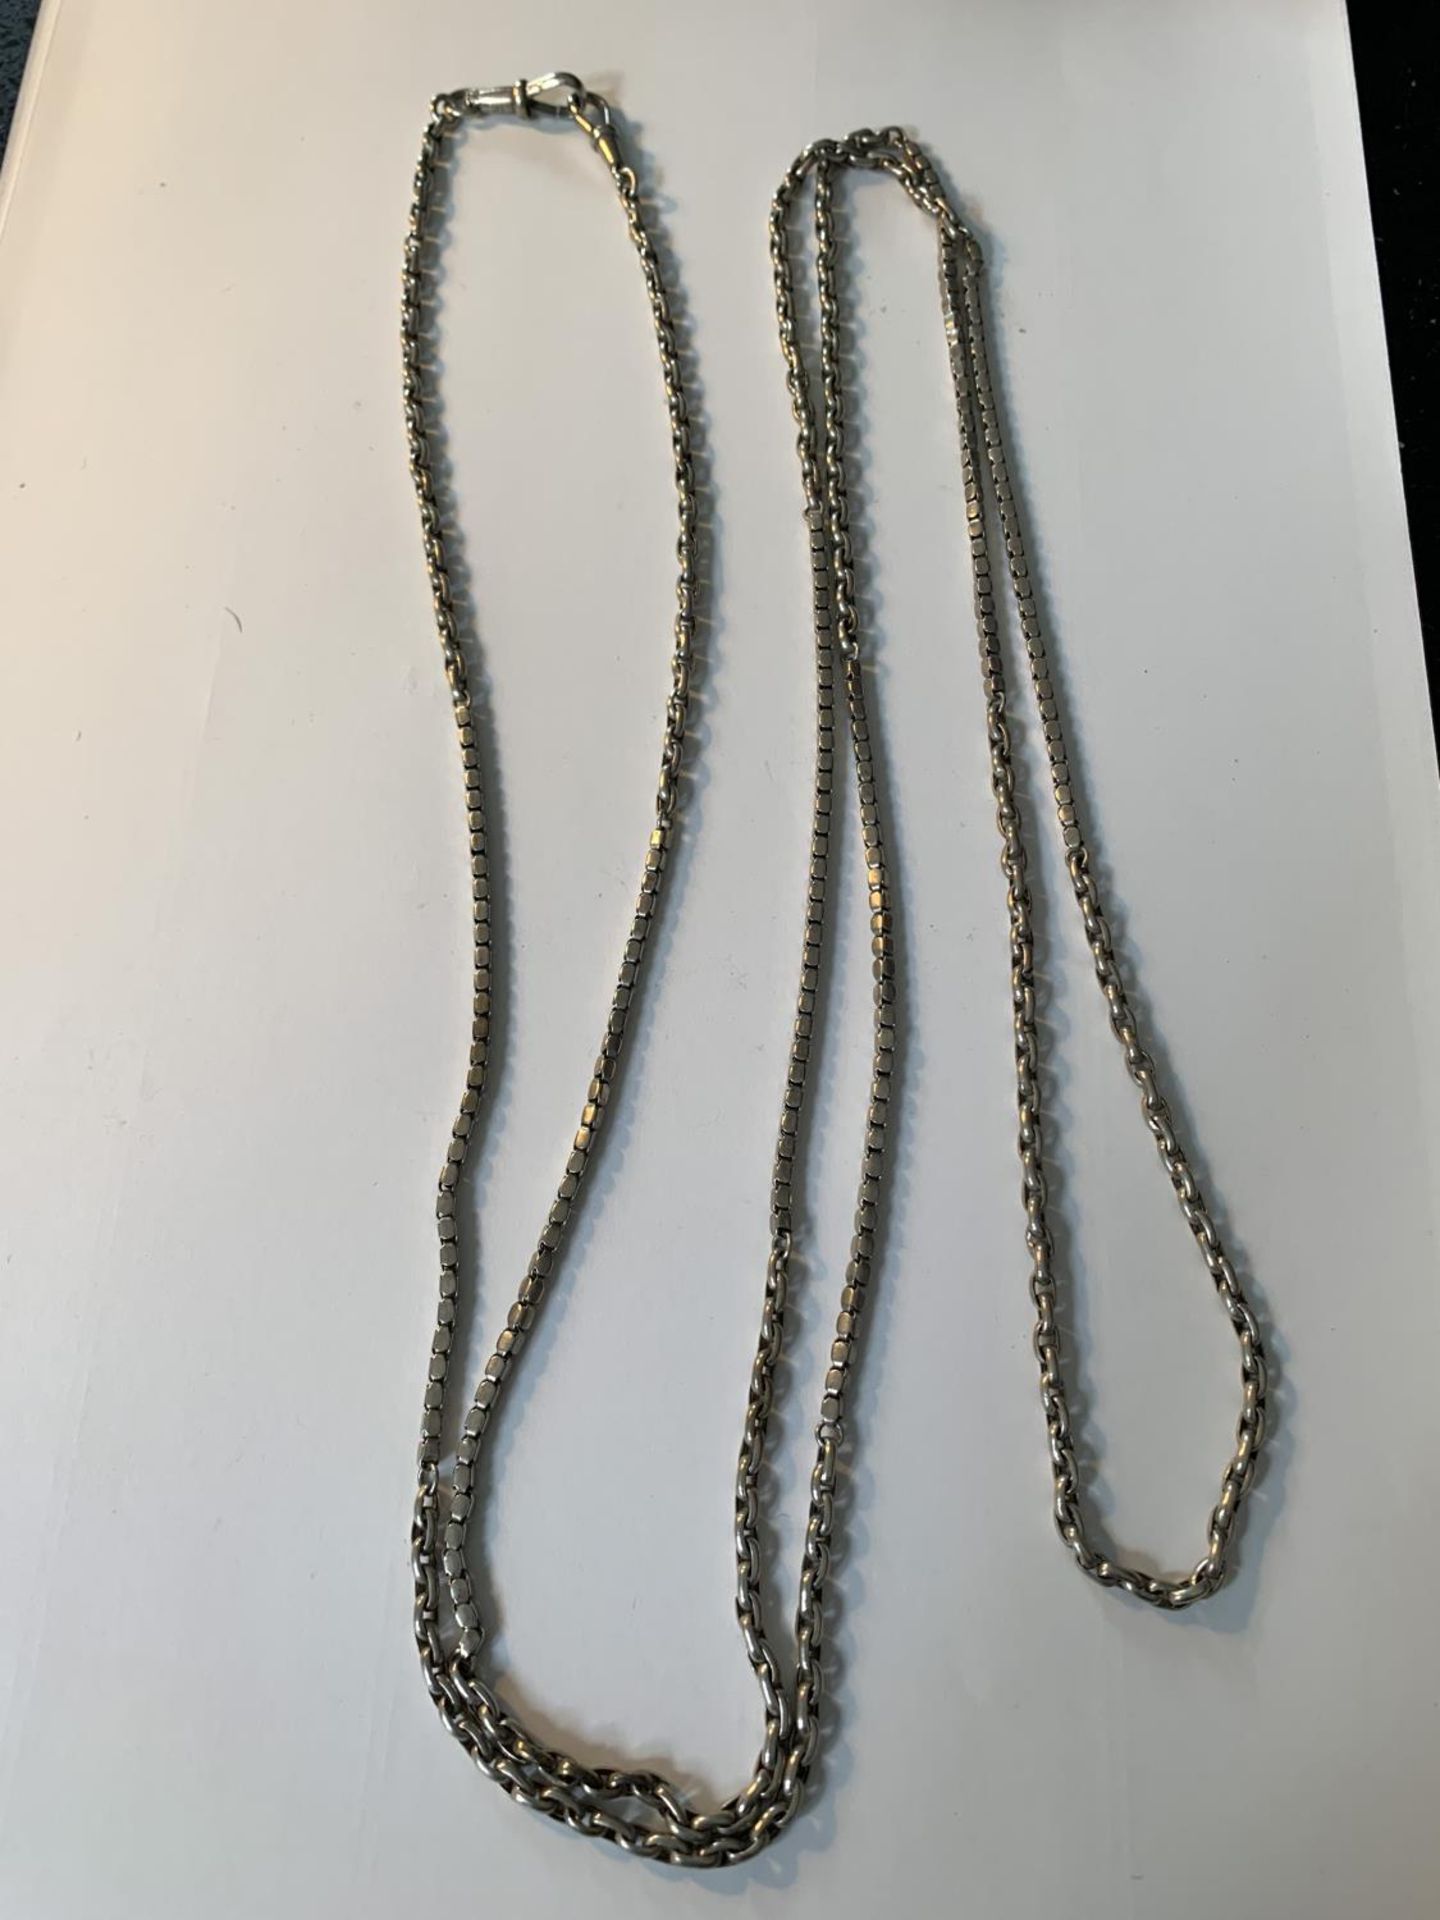 A MUFF CHAIN WITH TWO DESIGNS LENGTH 60 INCHES